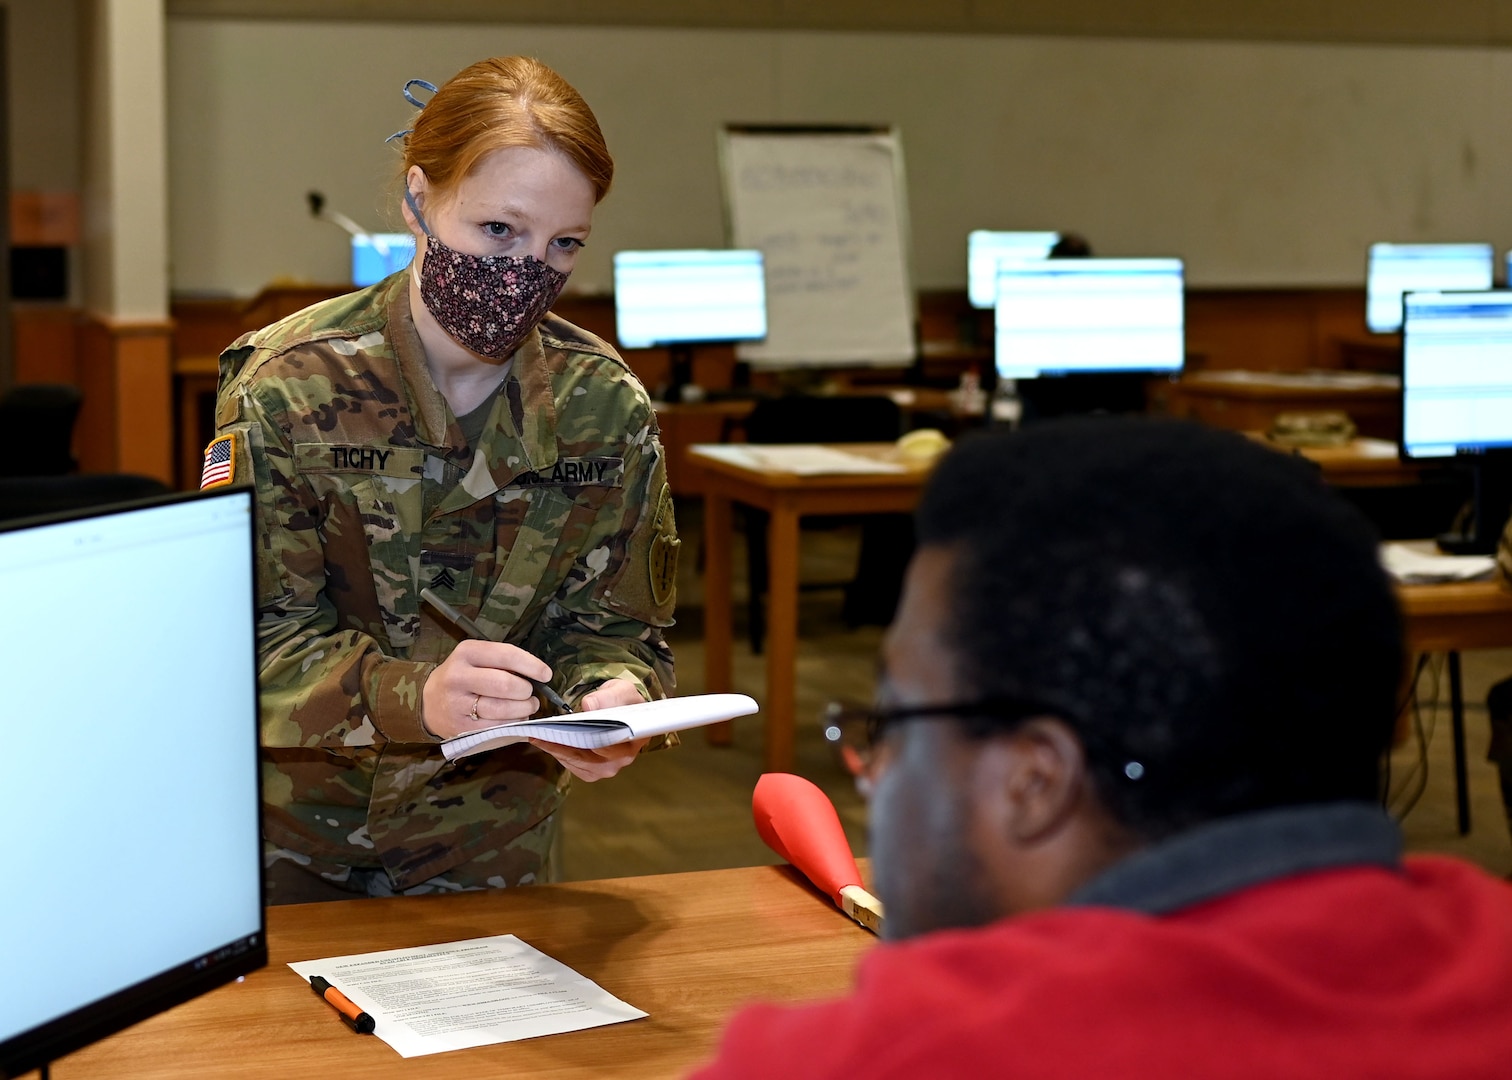 Sgt. Alexandria Tichy, a flutist with the 39th Army Band, New Hampshire Army National Guard, takes instructions from Kevin Myers, a civilian supervisor at an unemployment call center in Concord.